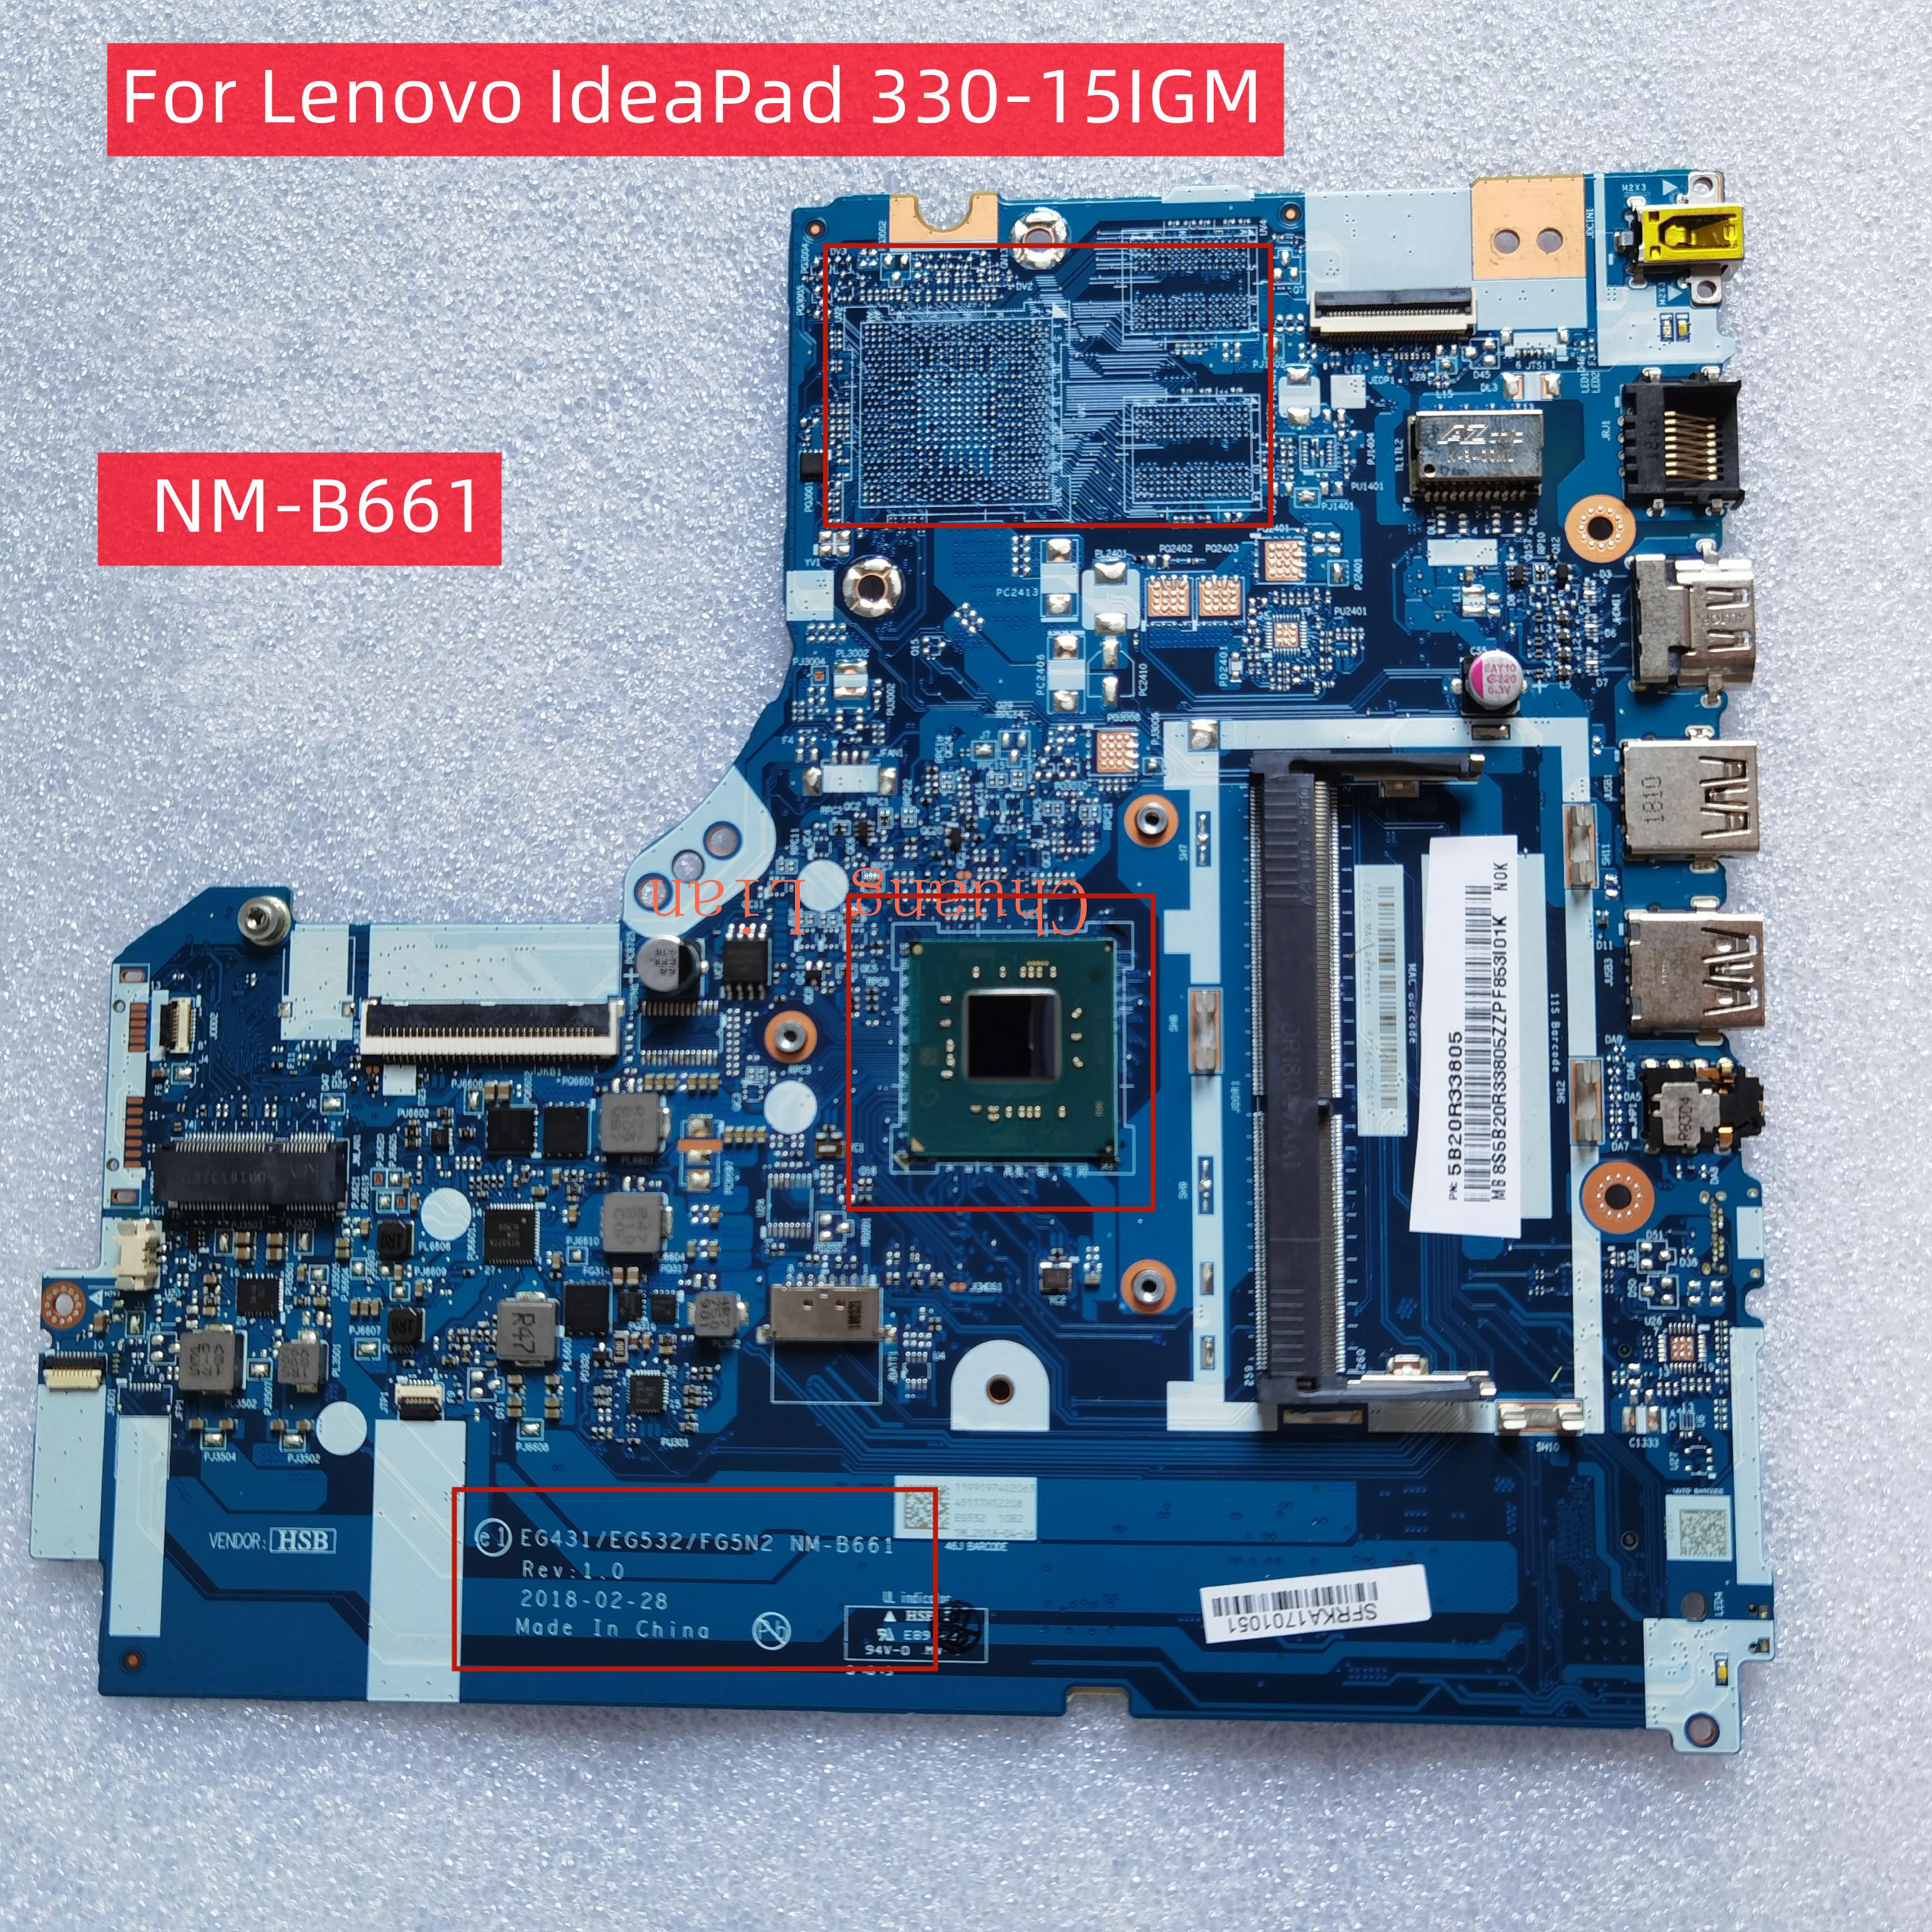 

Motherboards For Lenovo IdeaPad 33015IGM Laptop Motherboard NMB661 with CPU N4000 / N4100 / N5000 DDR4 100% fully tested